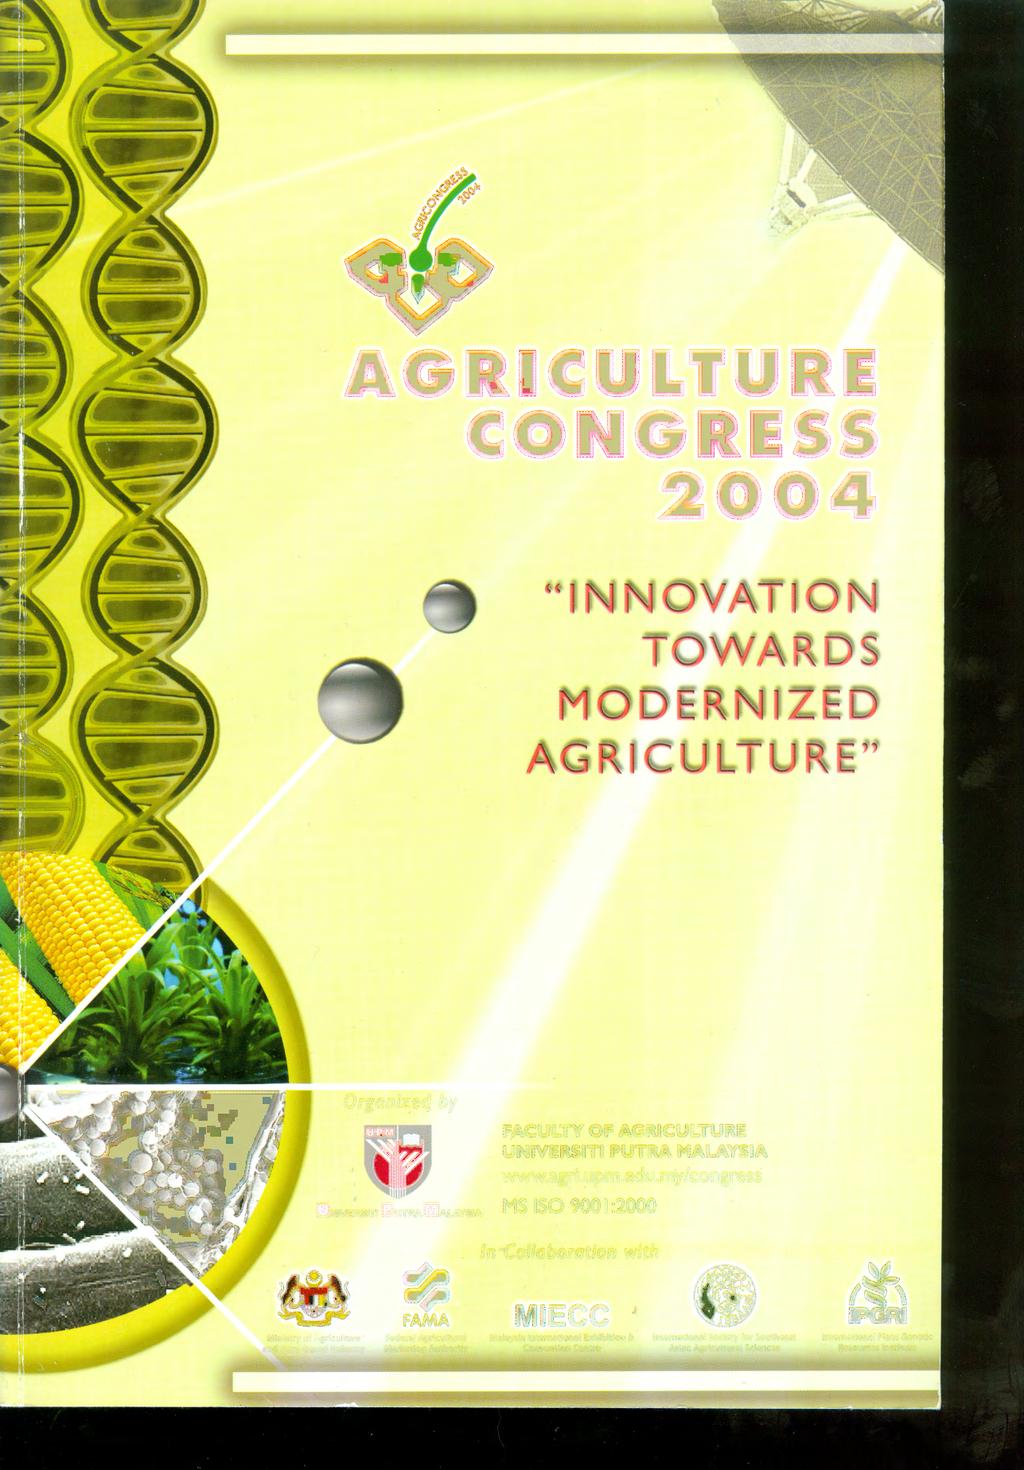 AGRICULTURE CONGRESS 2004 Organized by FACULTY OF AGRICULTURE UNIVERSITI